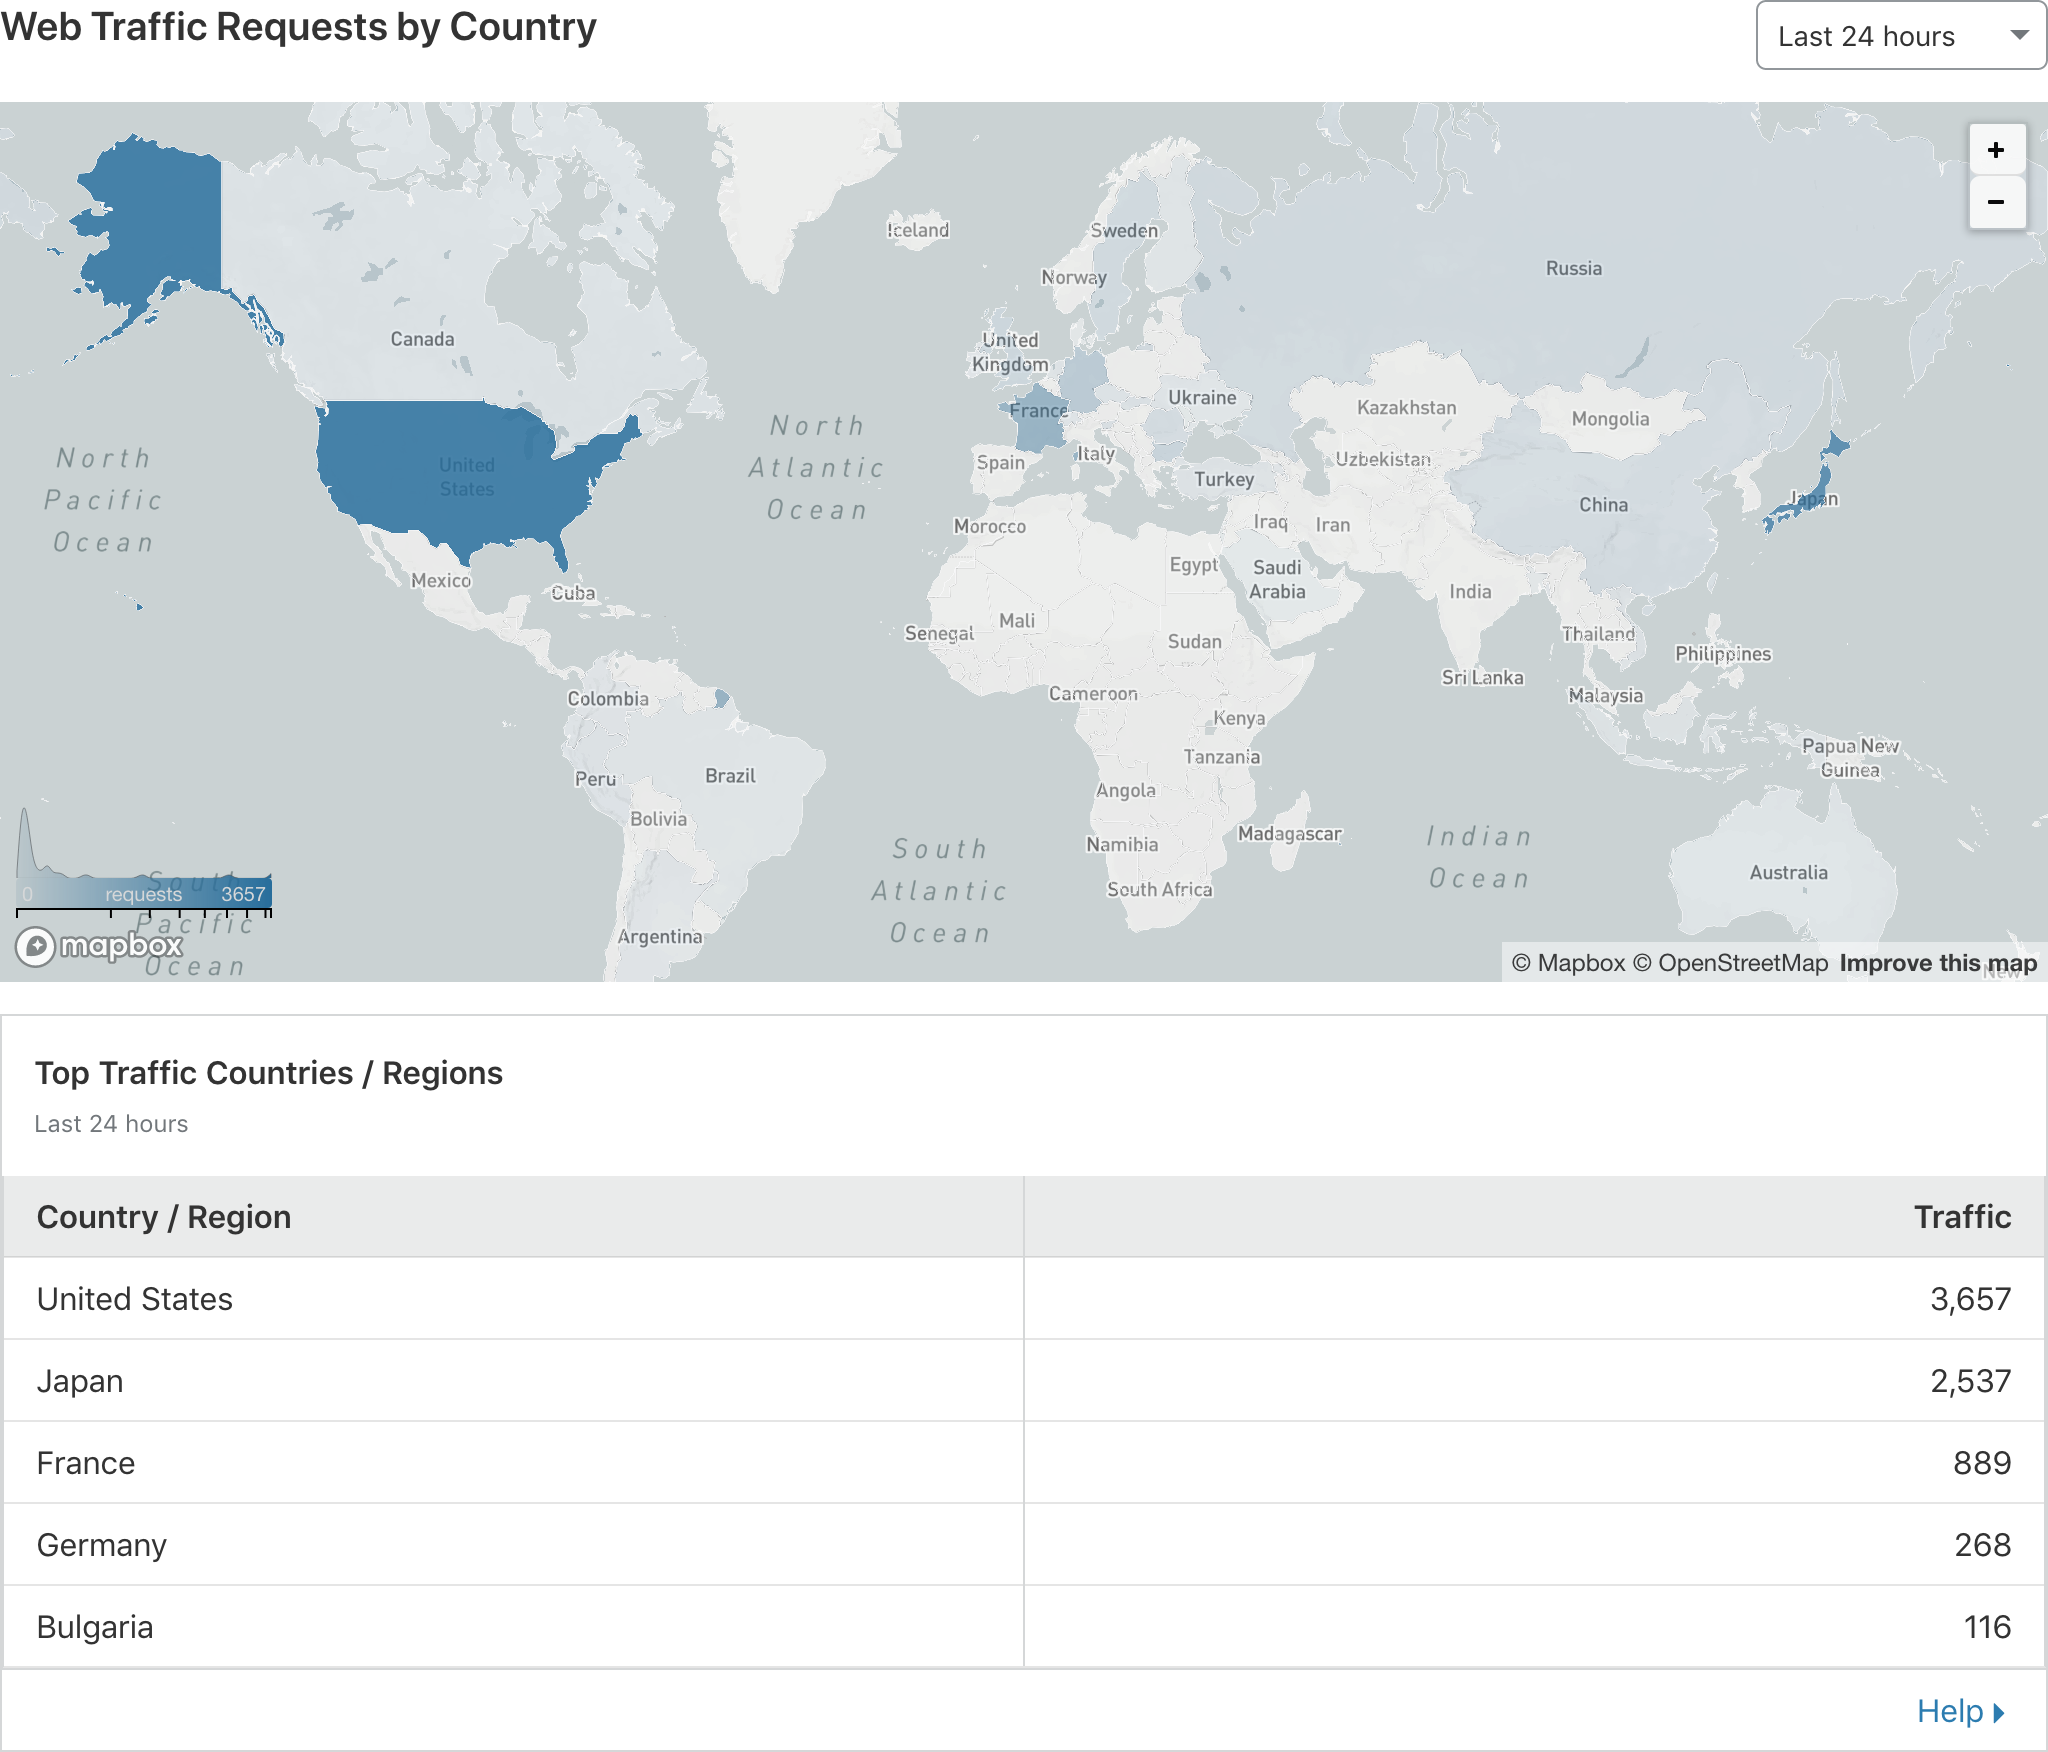 CloudflareのAnalytics画面、「Web Traffic Requests by Country」の項目